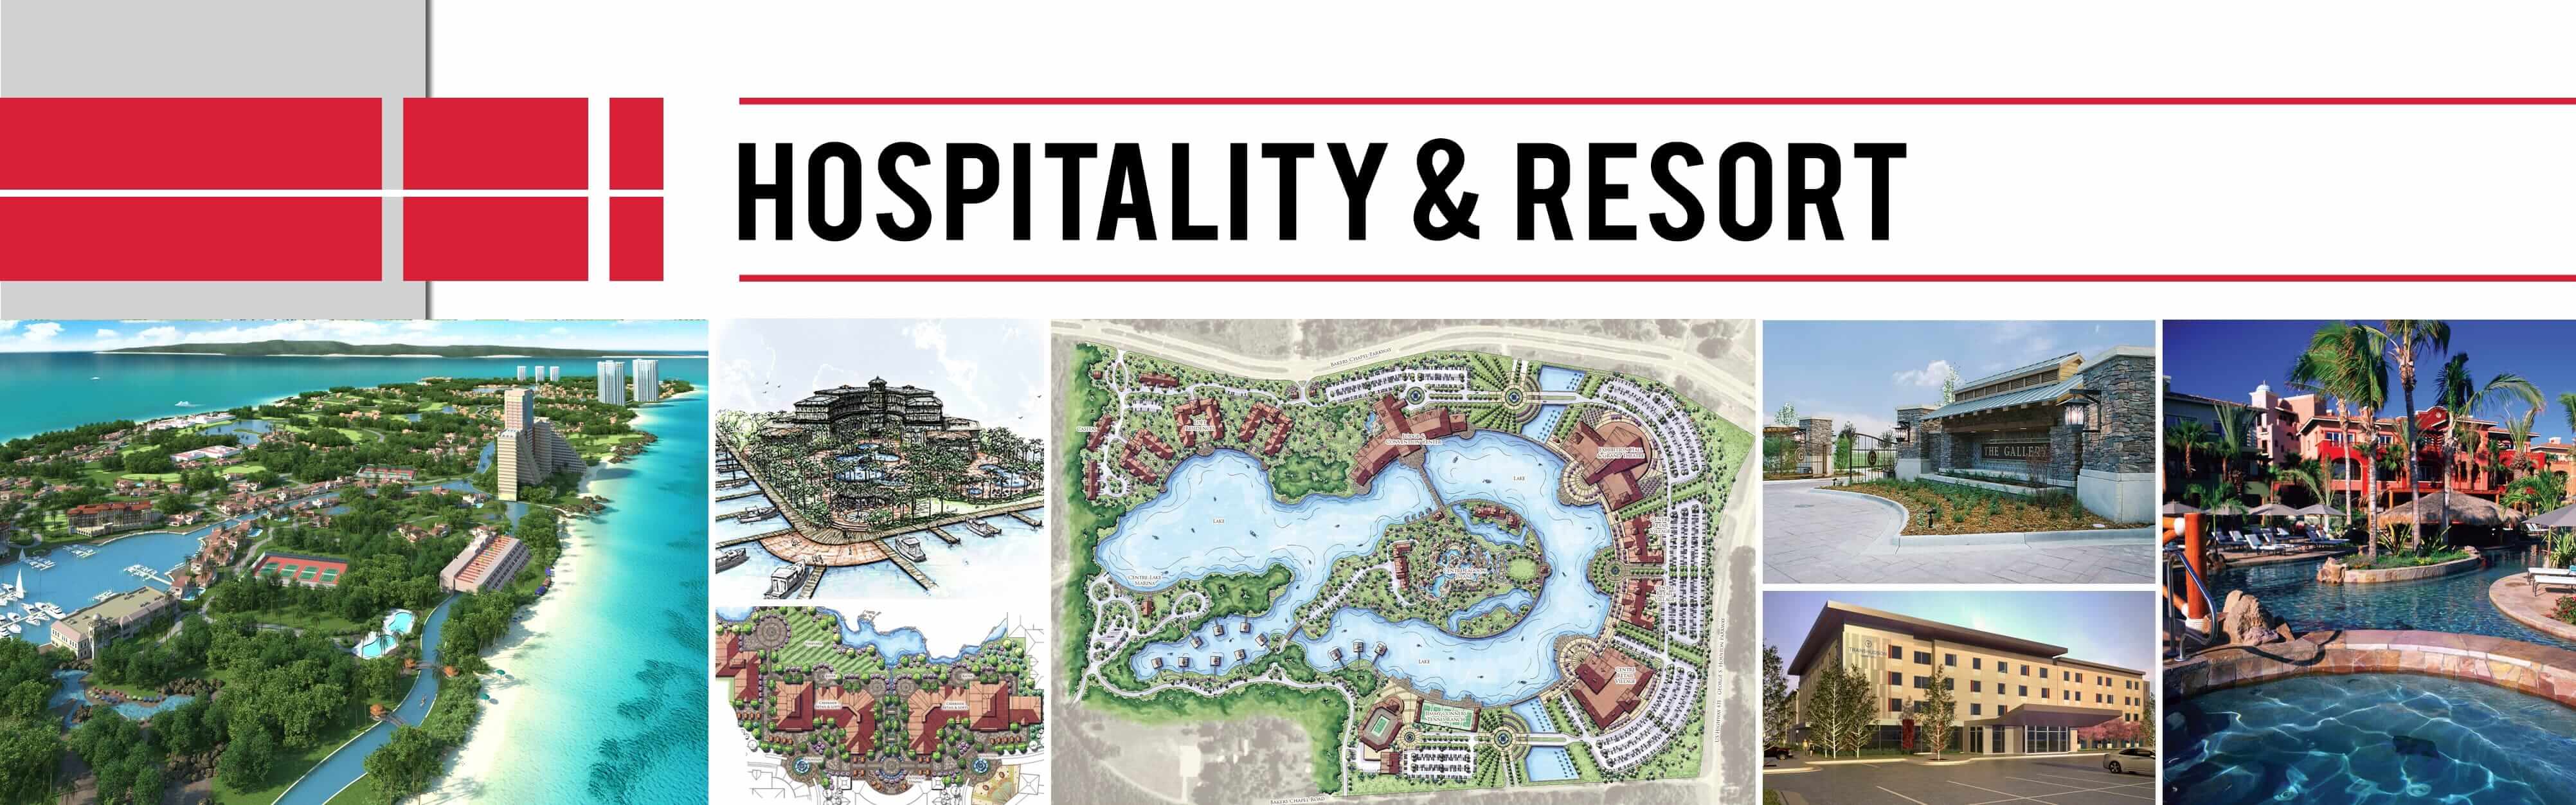 Hospitality and Resort architecture services located in Denver Colorado